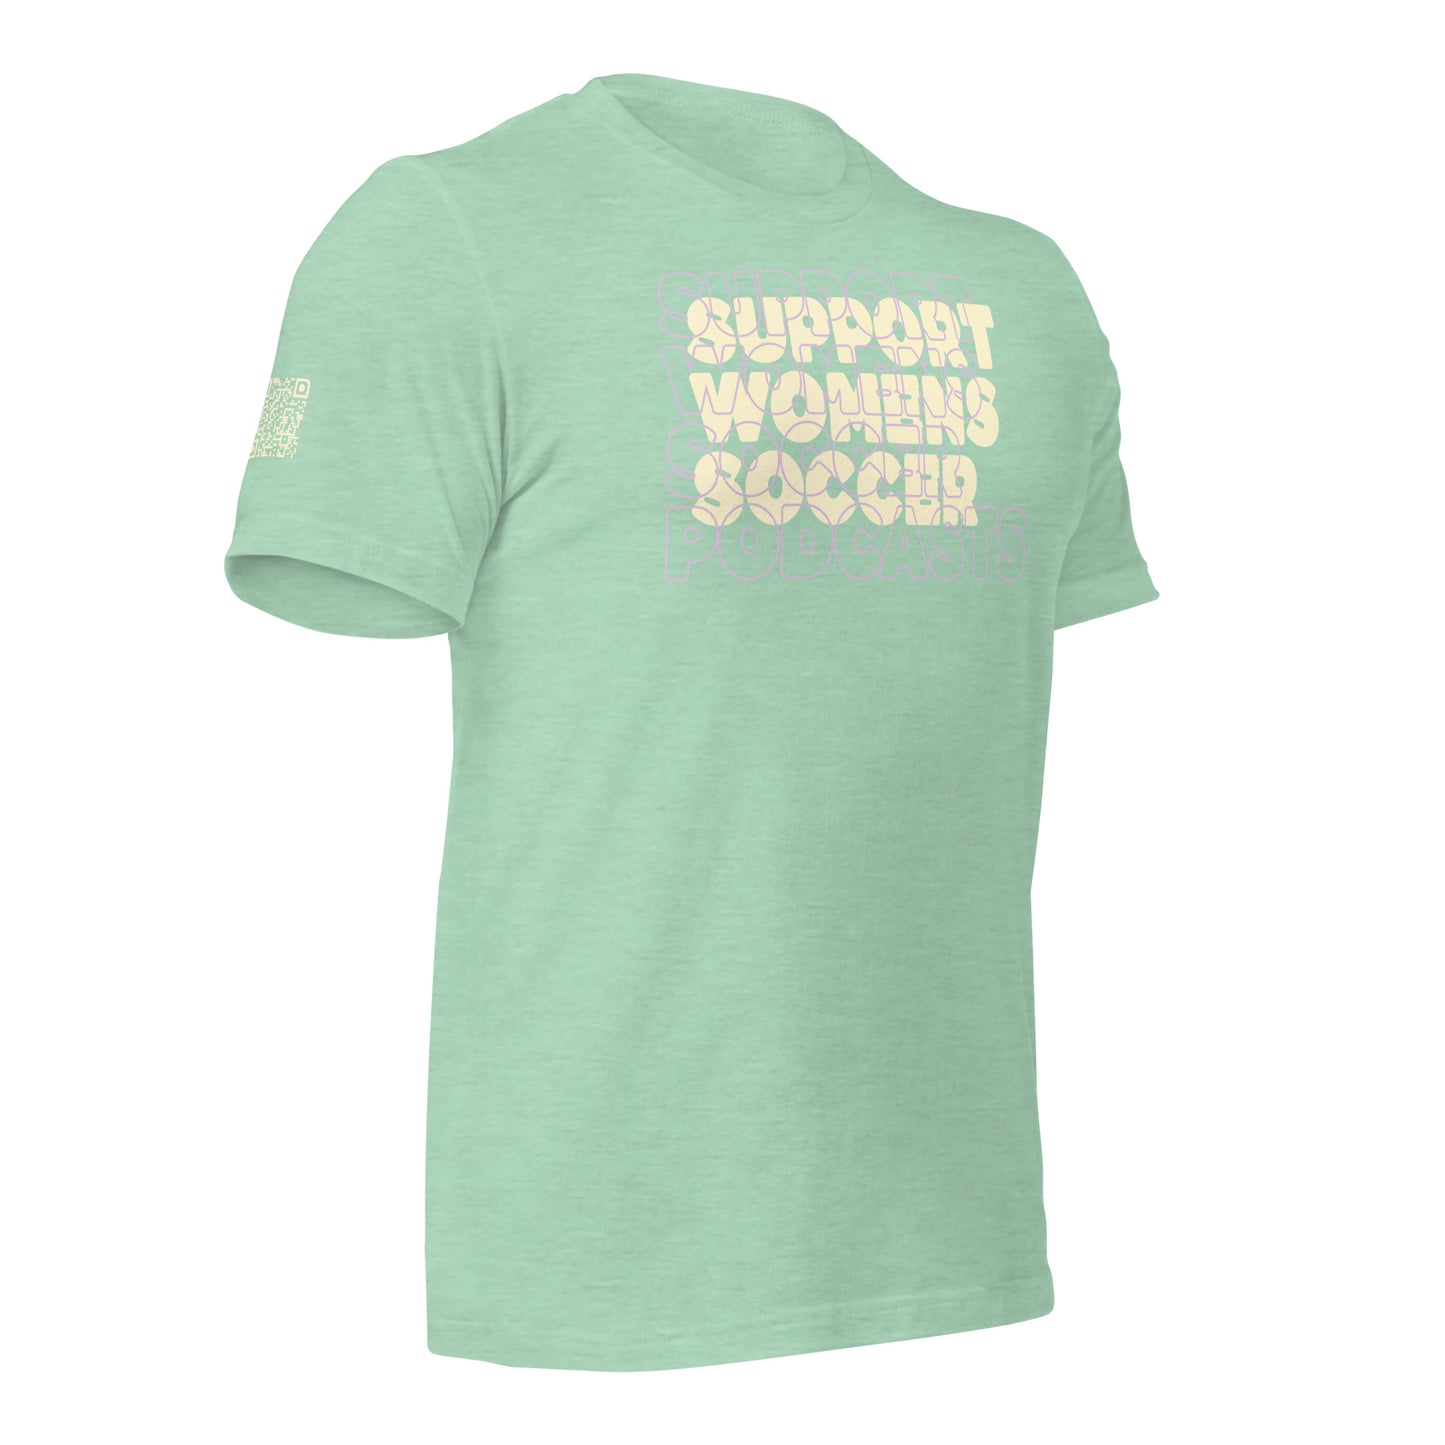 Support Womens Soccer (Podcasts)